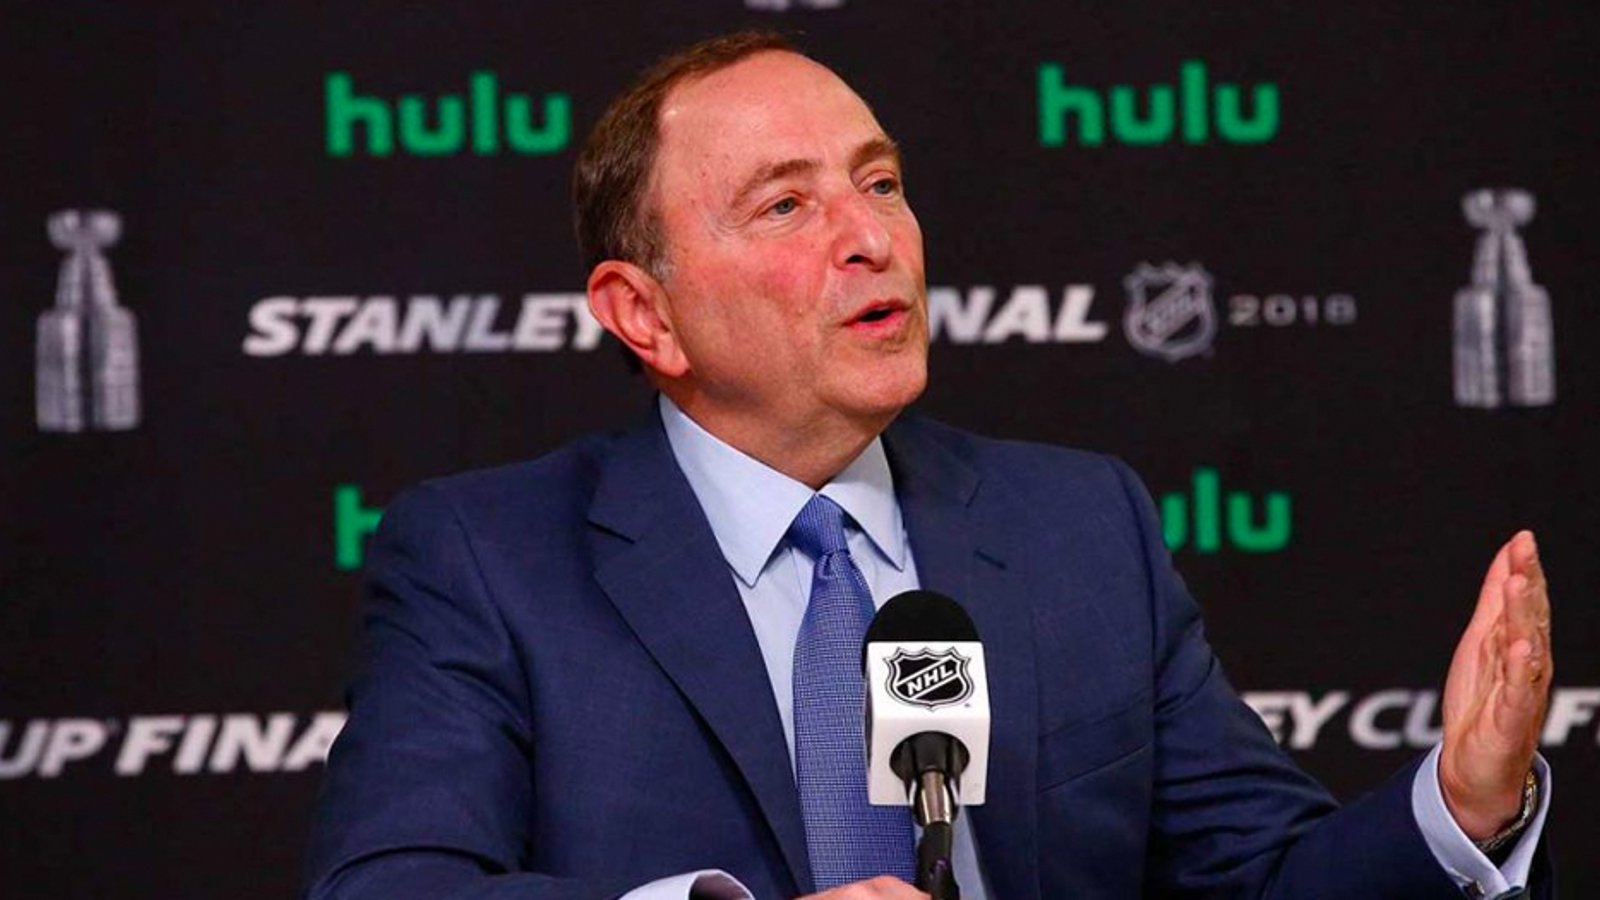 NHL officially suspends 2019-20 season, so what's next?